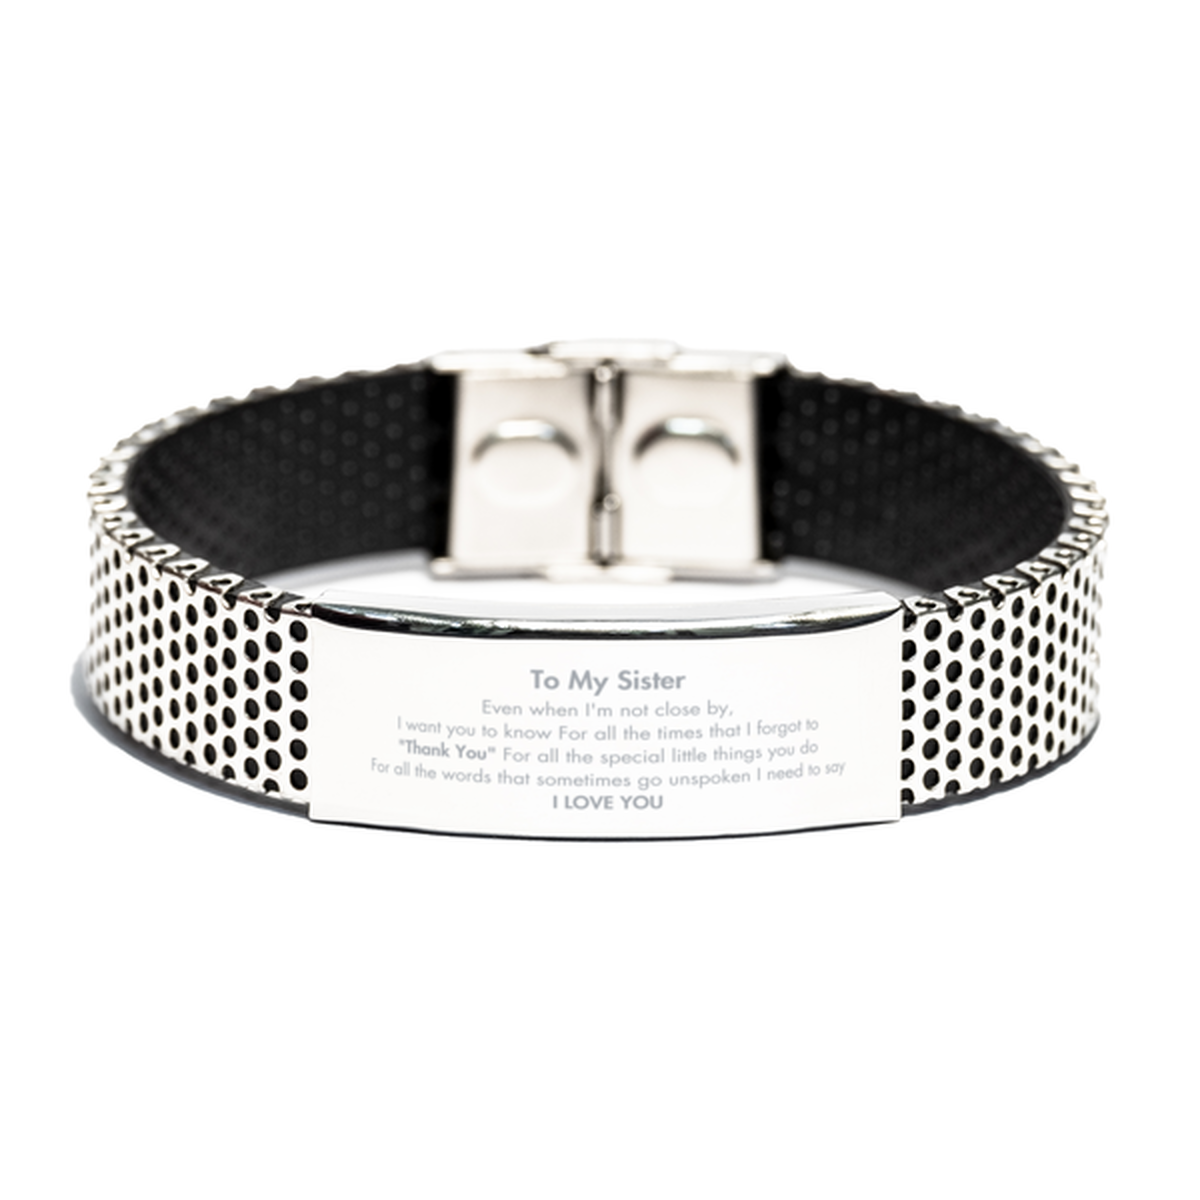 Thank You Gifts for Sister, Keepsake Stainless Steel Bracelet Gifts for Sister Birthday Mother's day Father's Day Sister For all the words That sometimes go unspoken I need to say I LOVE YOU